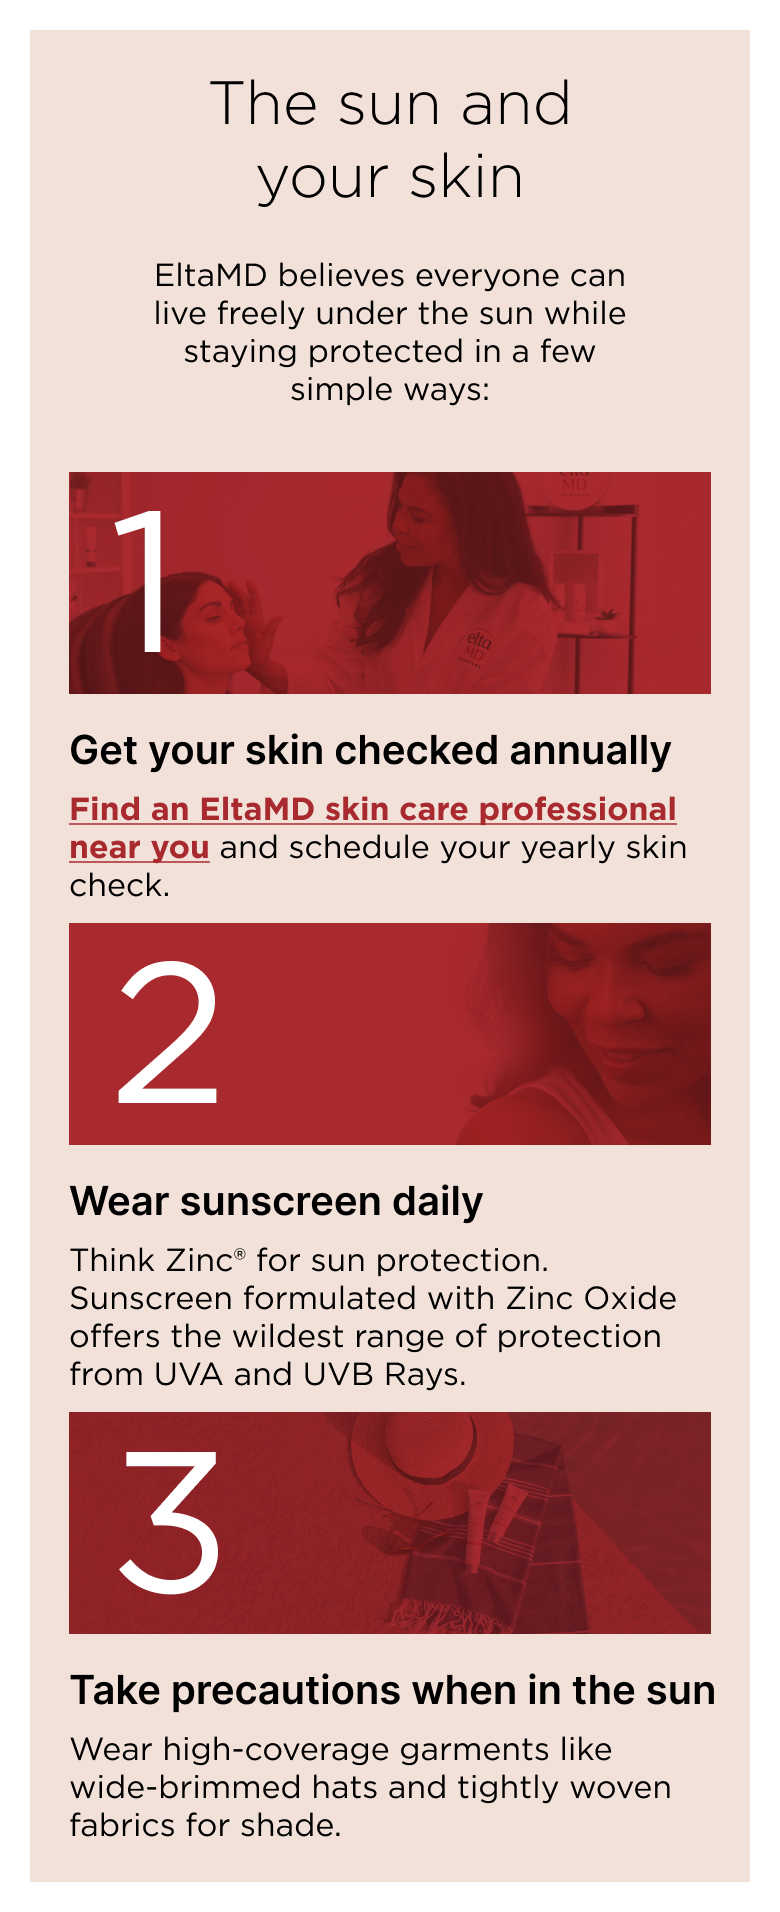 The sun and your skin infographic. 